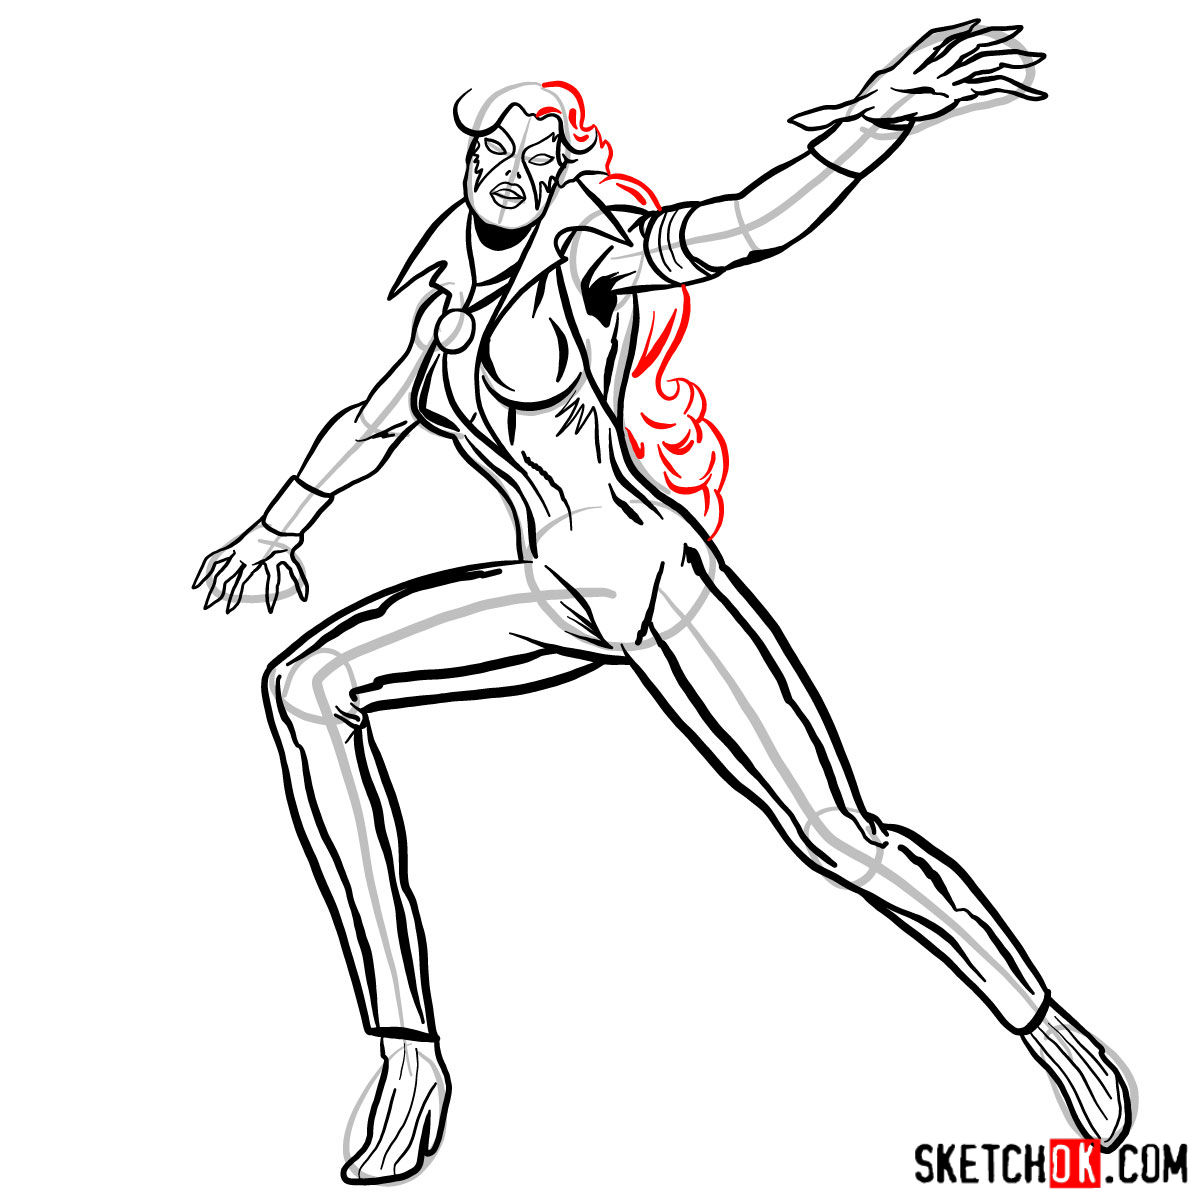 How to draw Dazzler the mutant from X-Men series - step 12